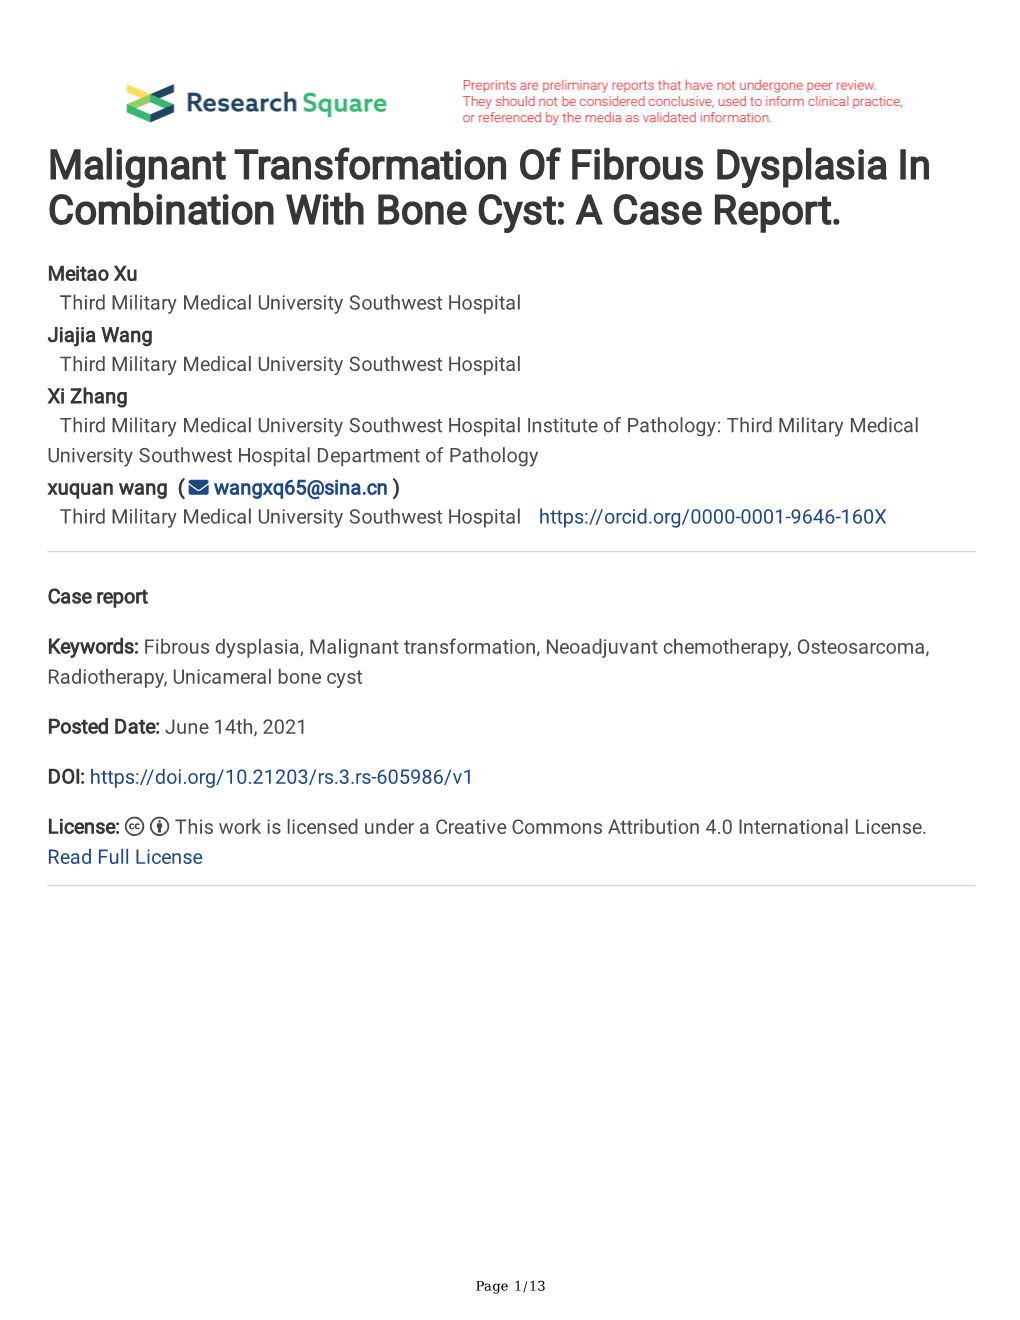 Malignant Transformation of Fibrous Dysplasia in Combination with Bone Cyst: a Case Report